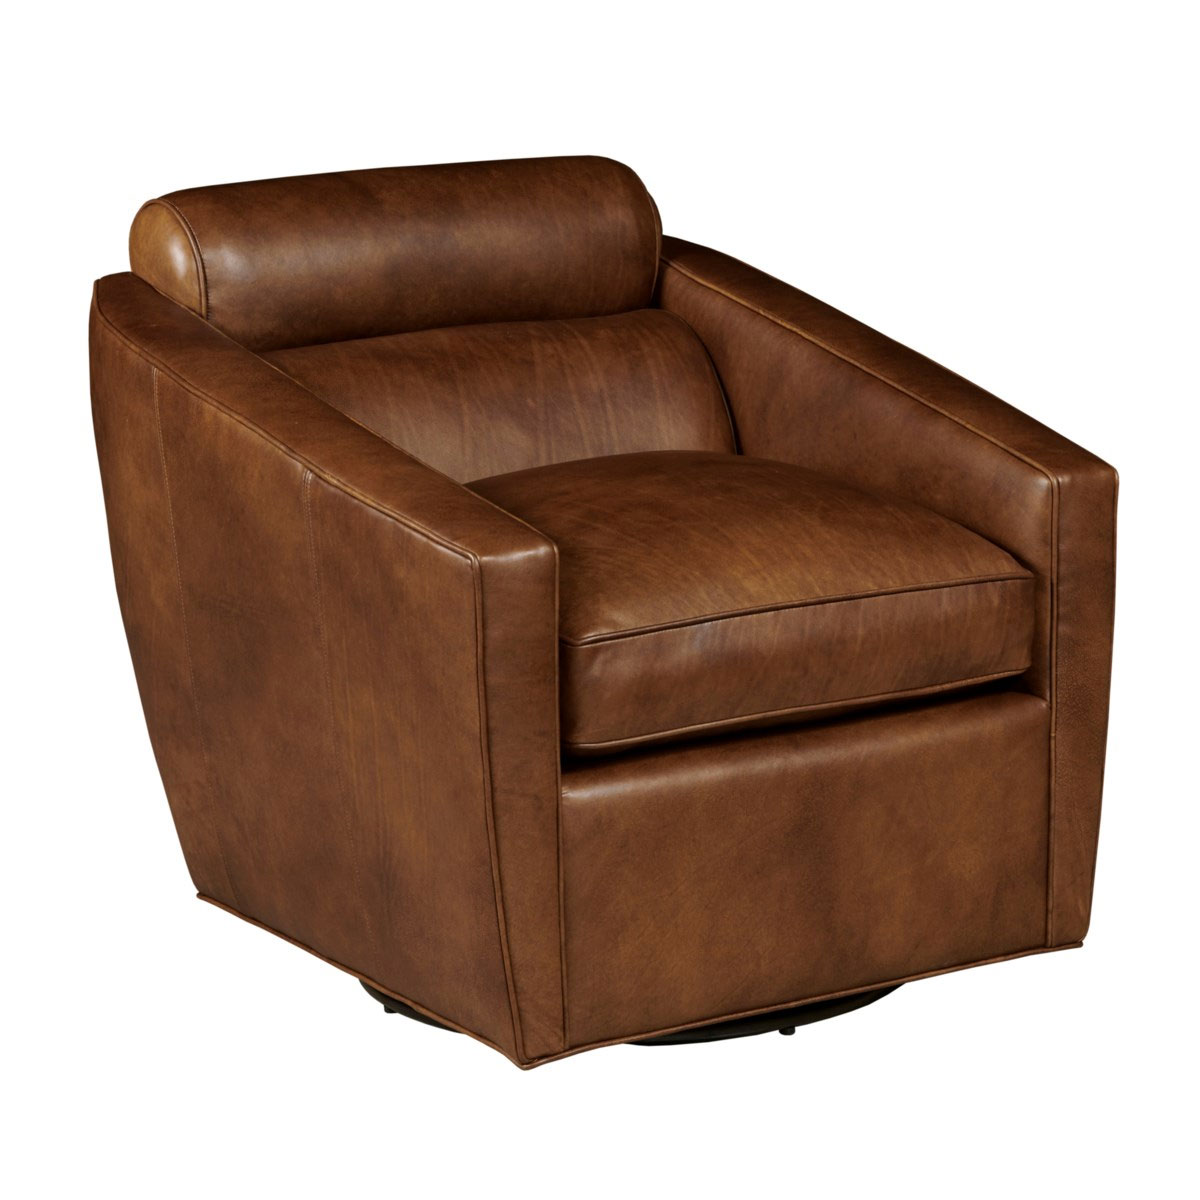 Our House 283-S Dorset Swivel Chair